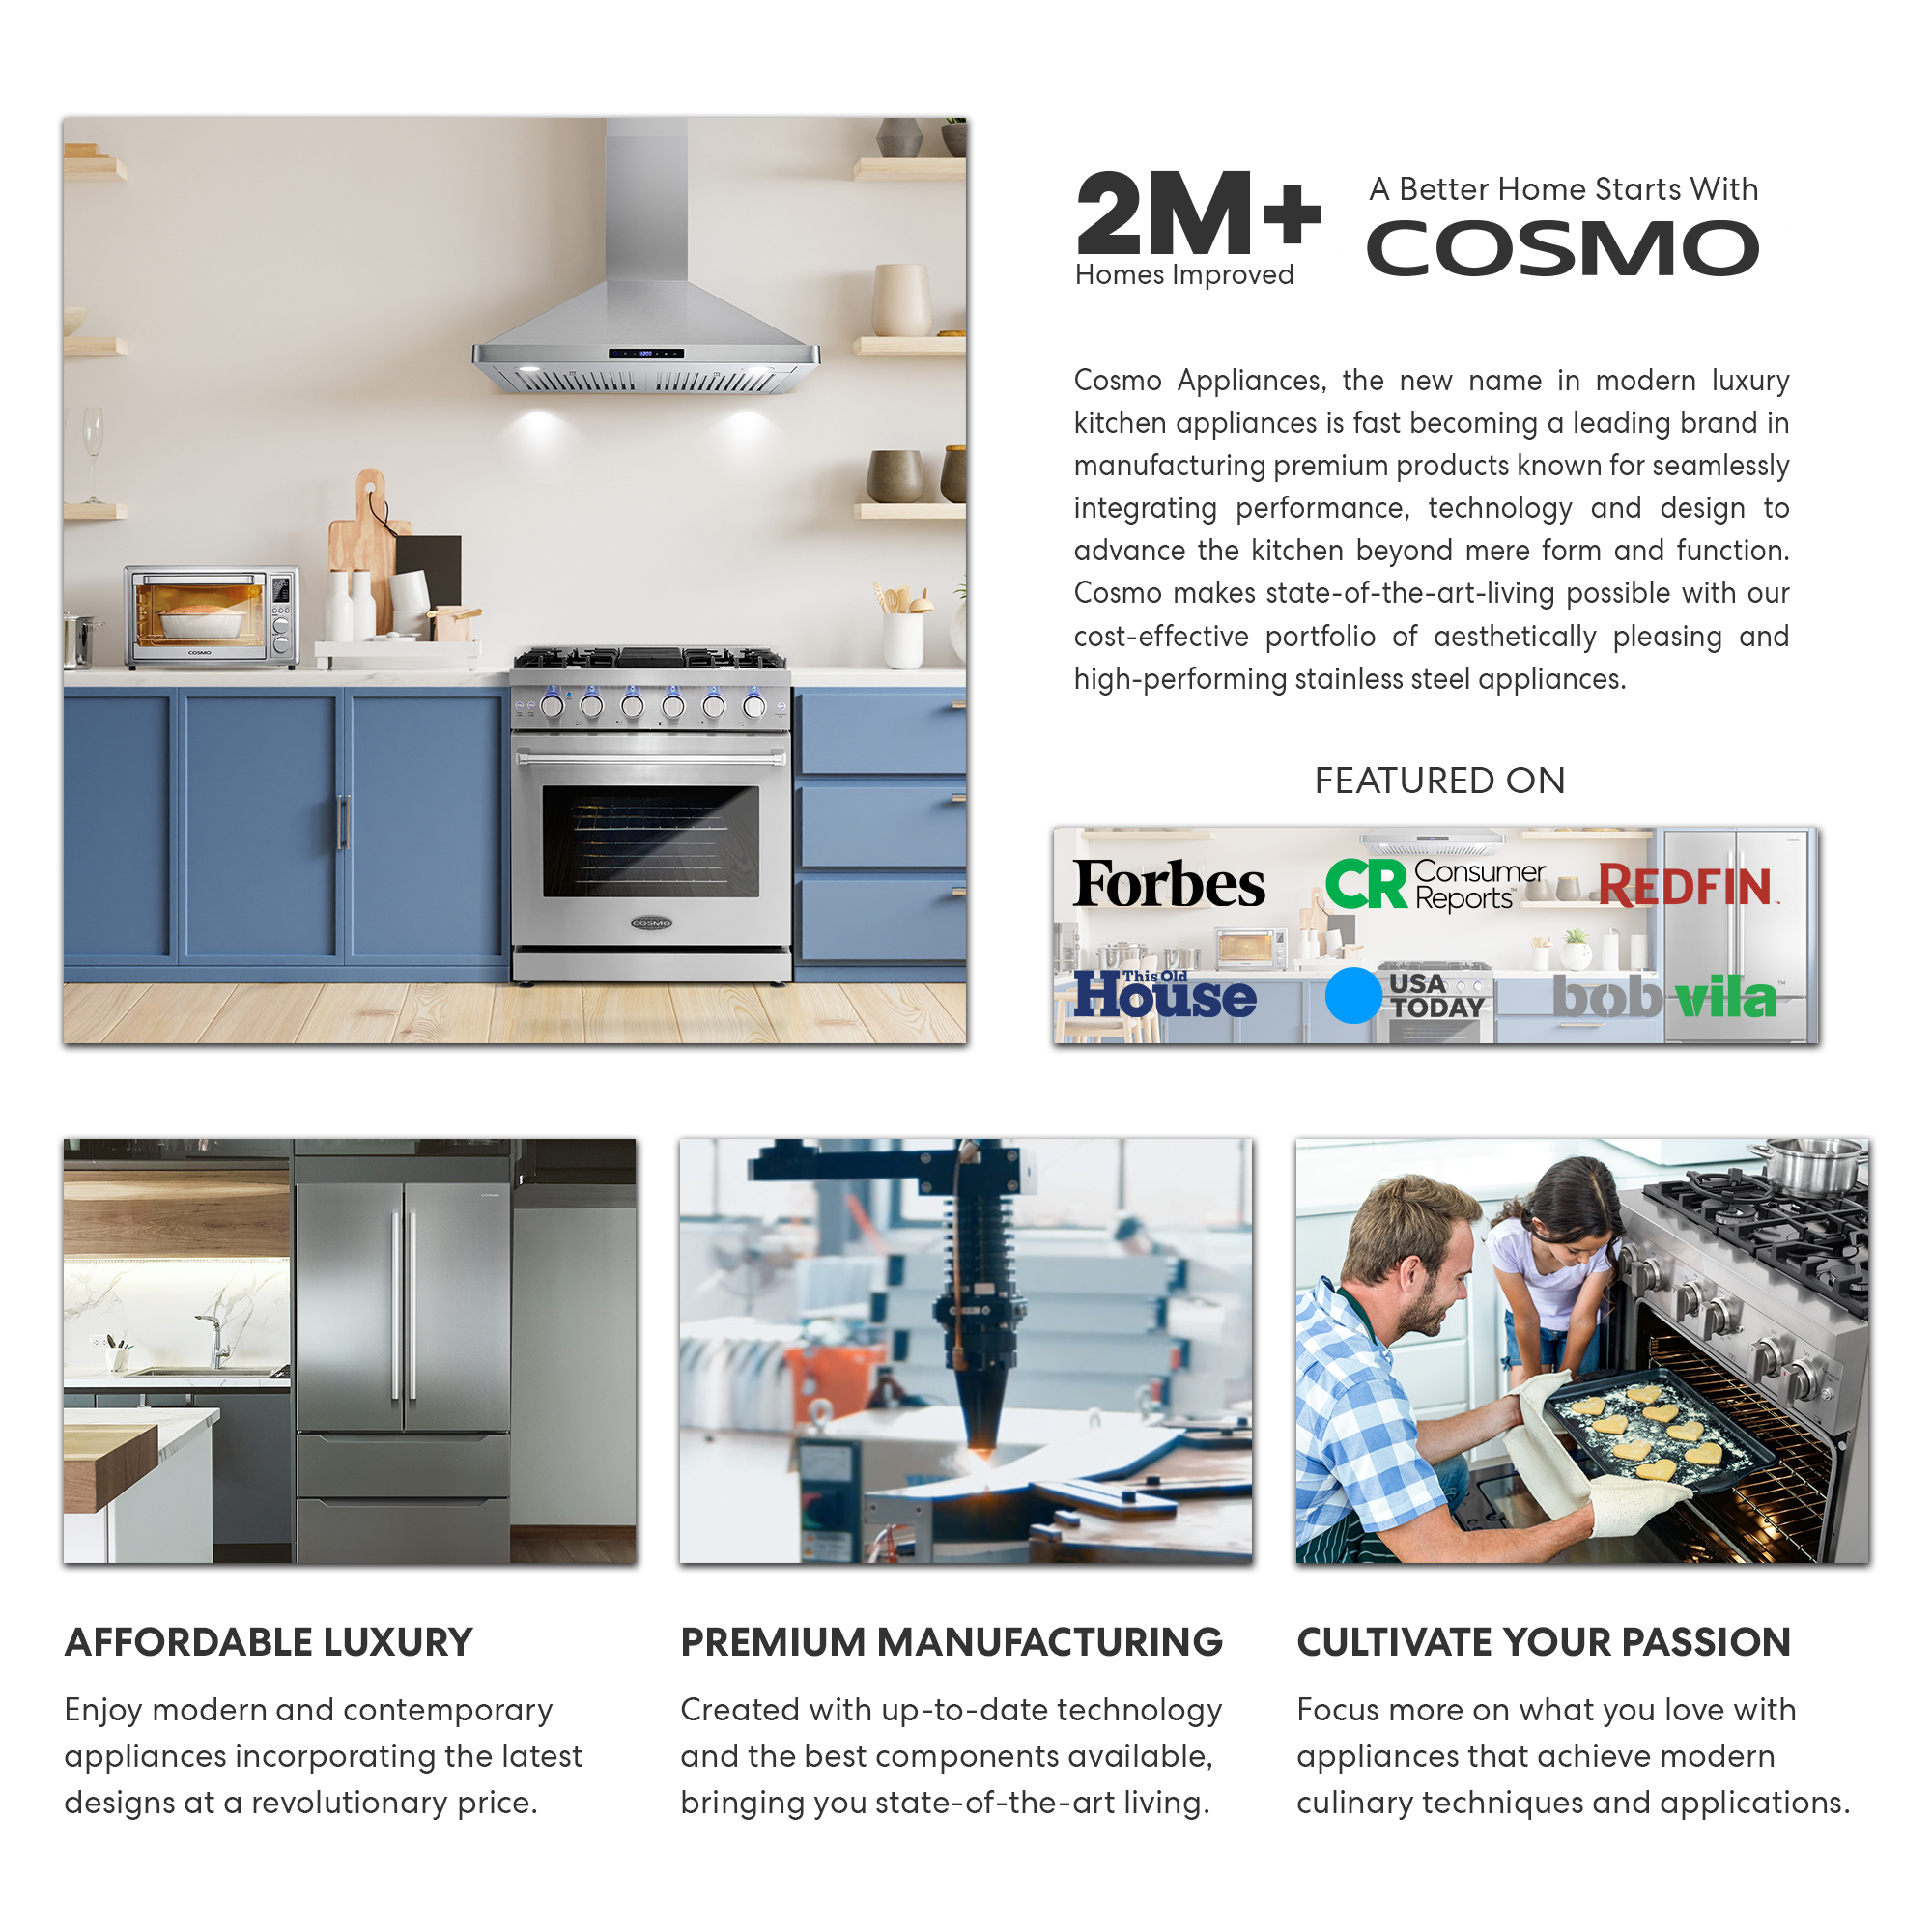 Cosmo 30 in. 380 CFM Ducted Wall Mount Range Hood, Push Button Control Panel, Permanent Filters and LED Lighting